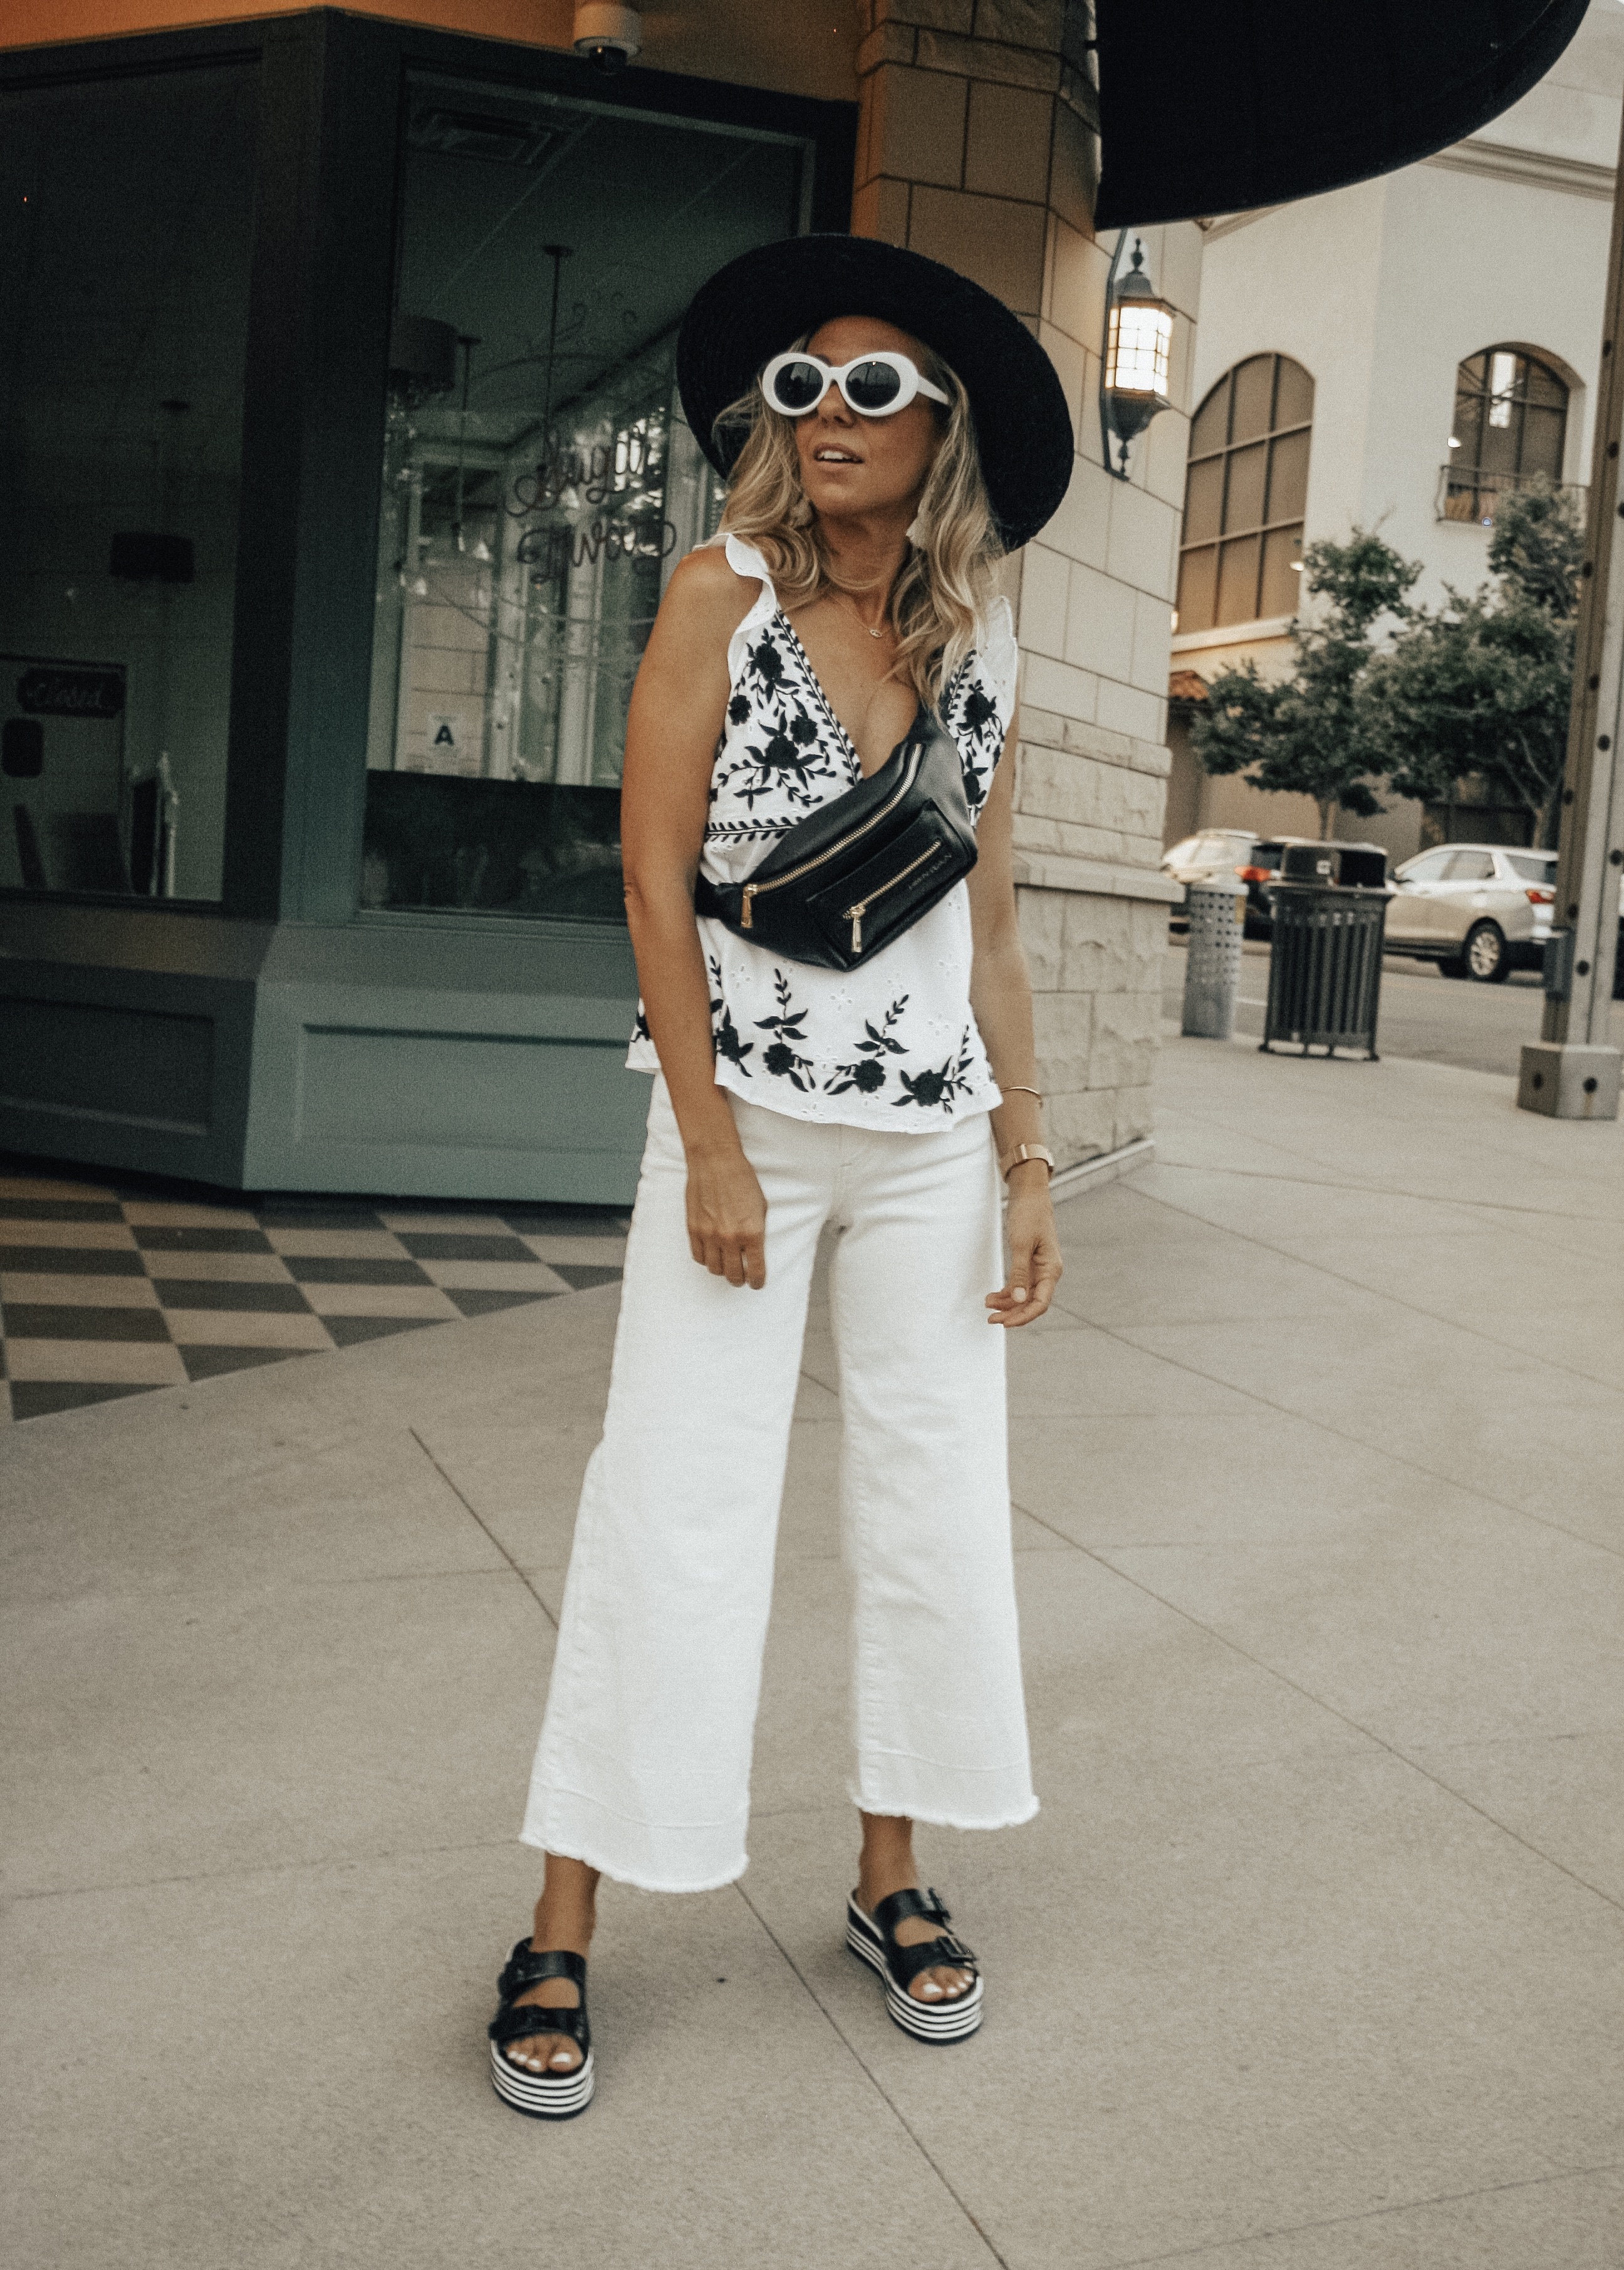 THE FANNY PACK IS BACK + 2 WAYS TO STYLE IT- Jaclyn De Leon Style + FAWN DESIGN FAWNY PACK + CASUAL STREET STYLE + MOM STYLE + BELT BAG + SUMMER OUTFIT + FALL STYLE + HOW TO STYLE A FANNY PACK + 90'S STYLE + RETRO LOOK + EDGY STREET STYLE LOOK +BLACK AND WHITE EMBROIDERED TOP + WHITE CULOTTES + YELLOW JUMPSUIT